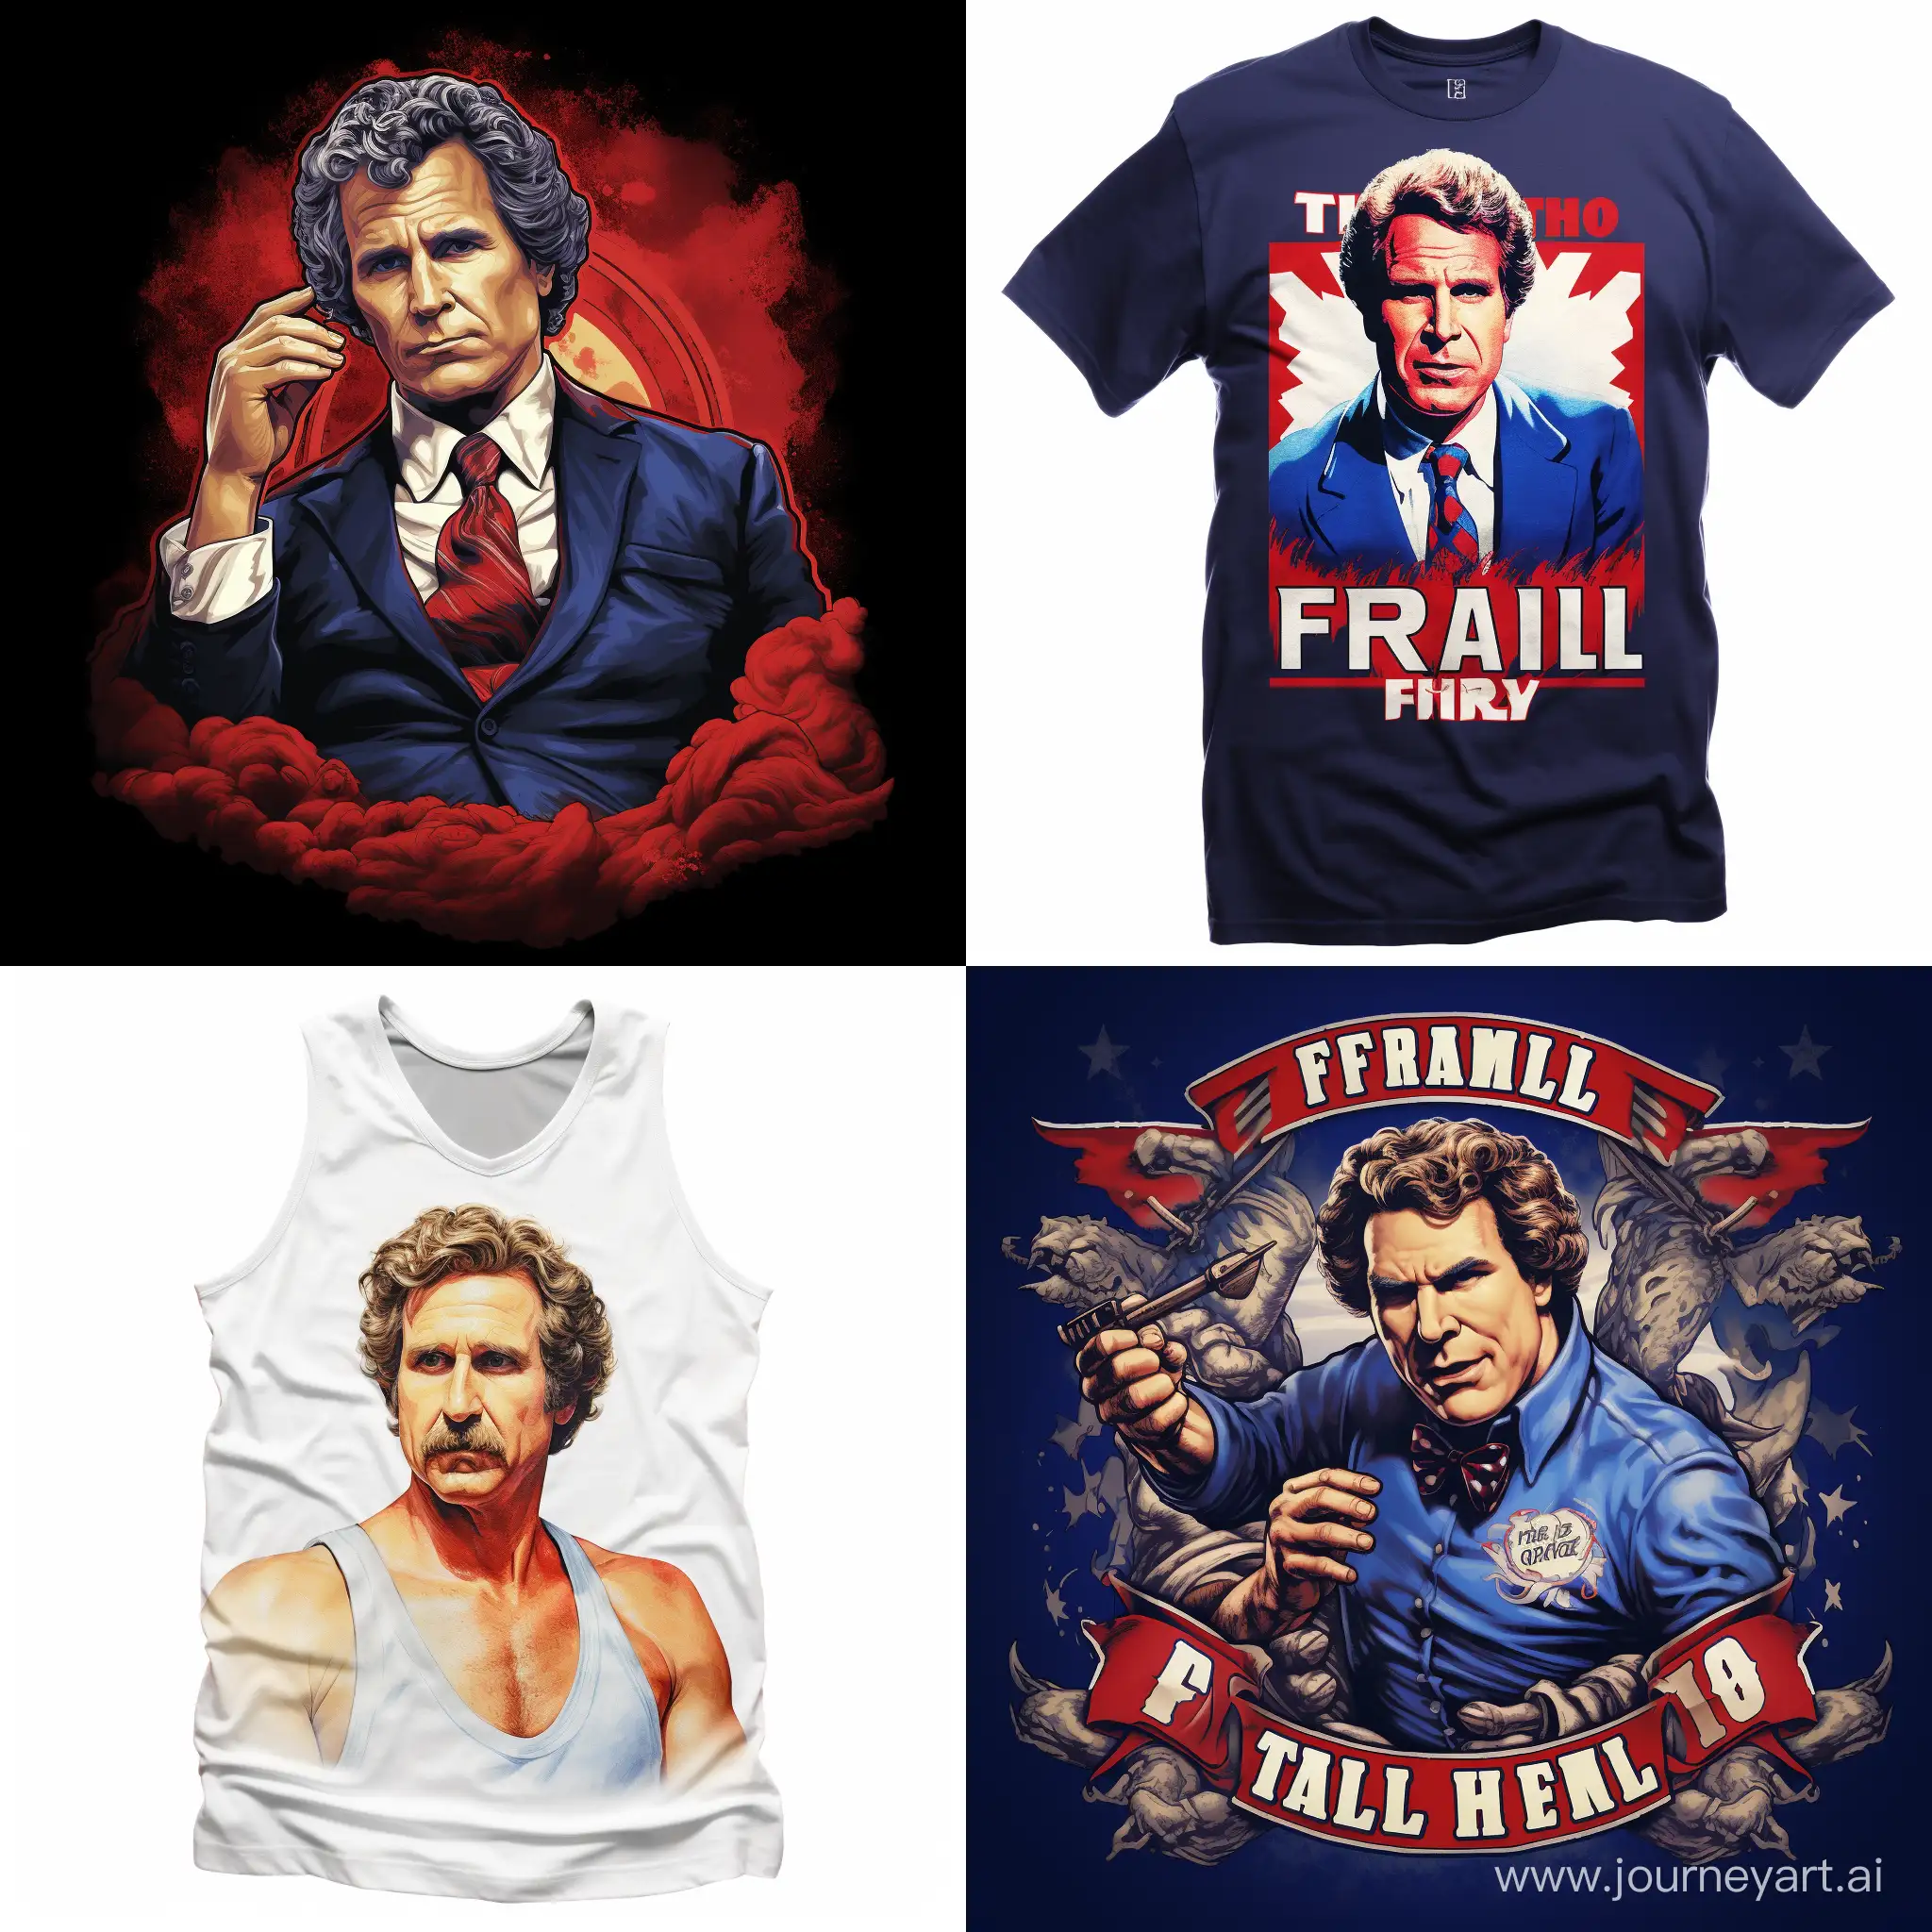 Will-Ferrell-as-Frank-the-Tank-from-Old-School-on-a-TShirt